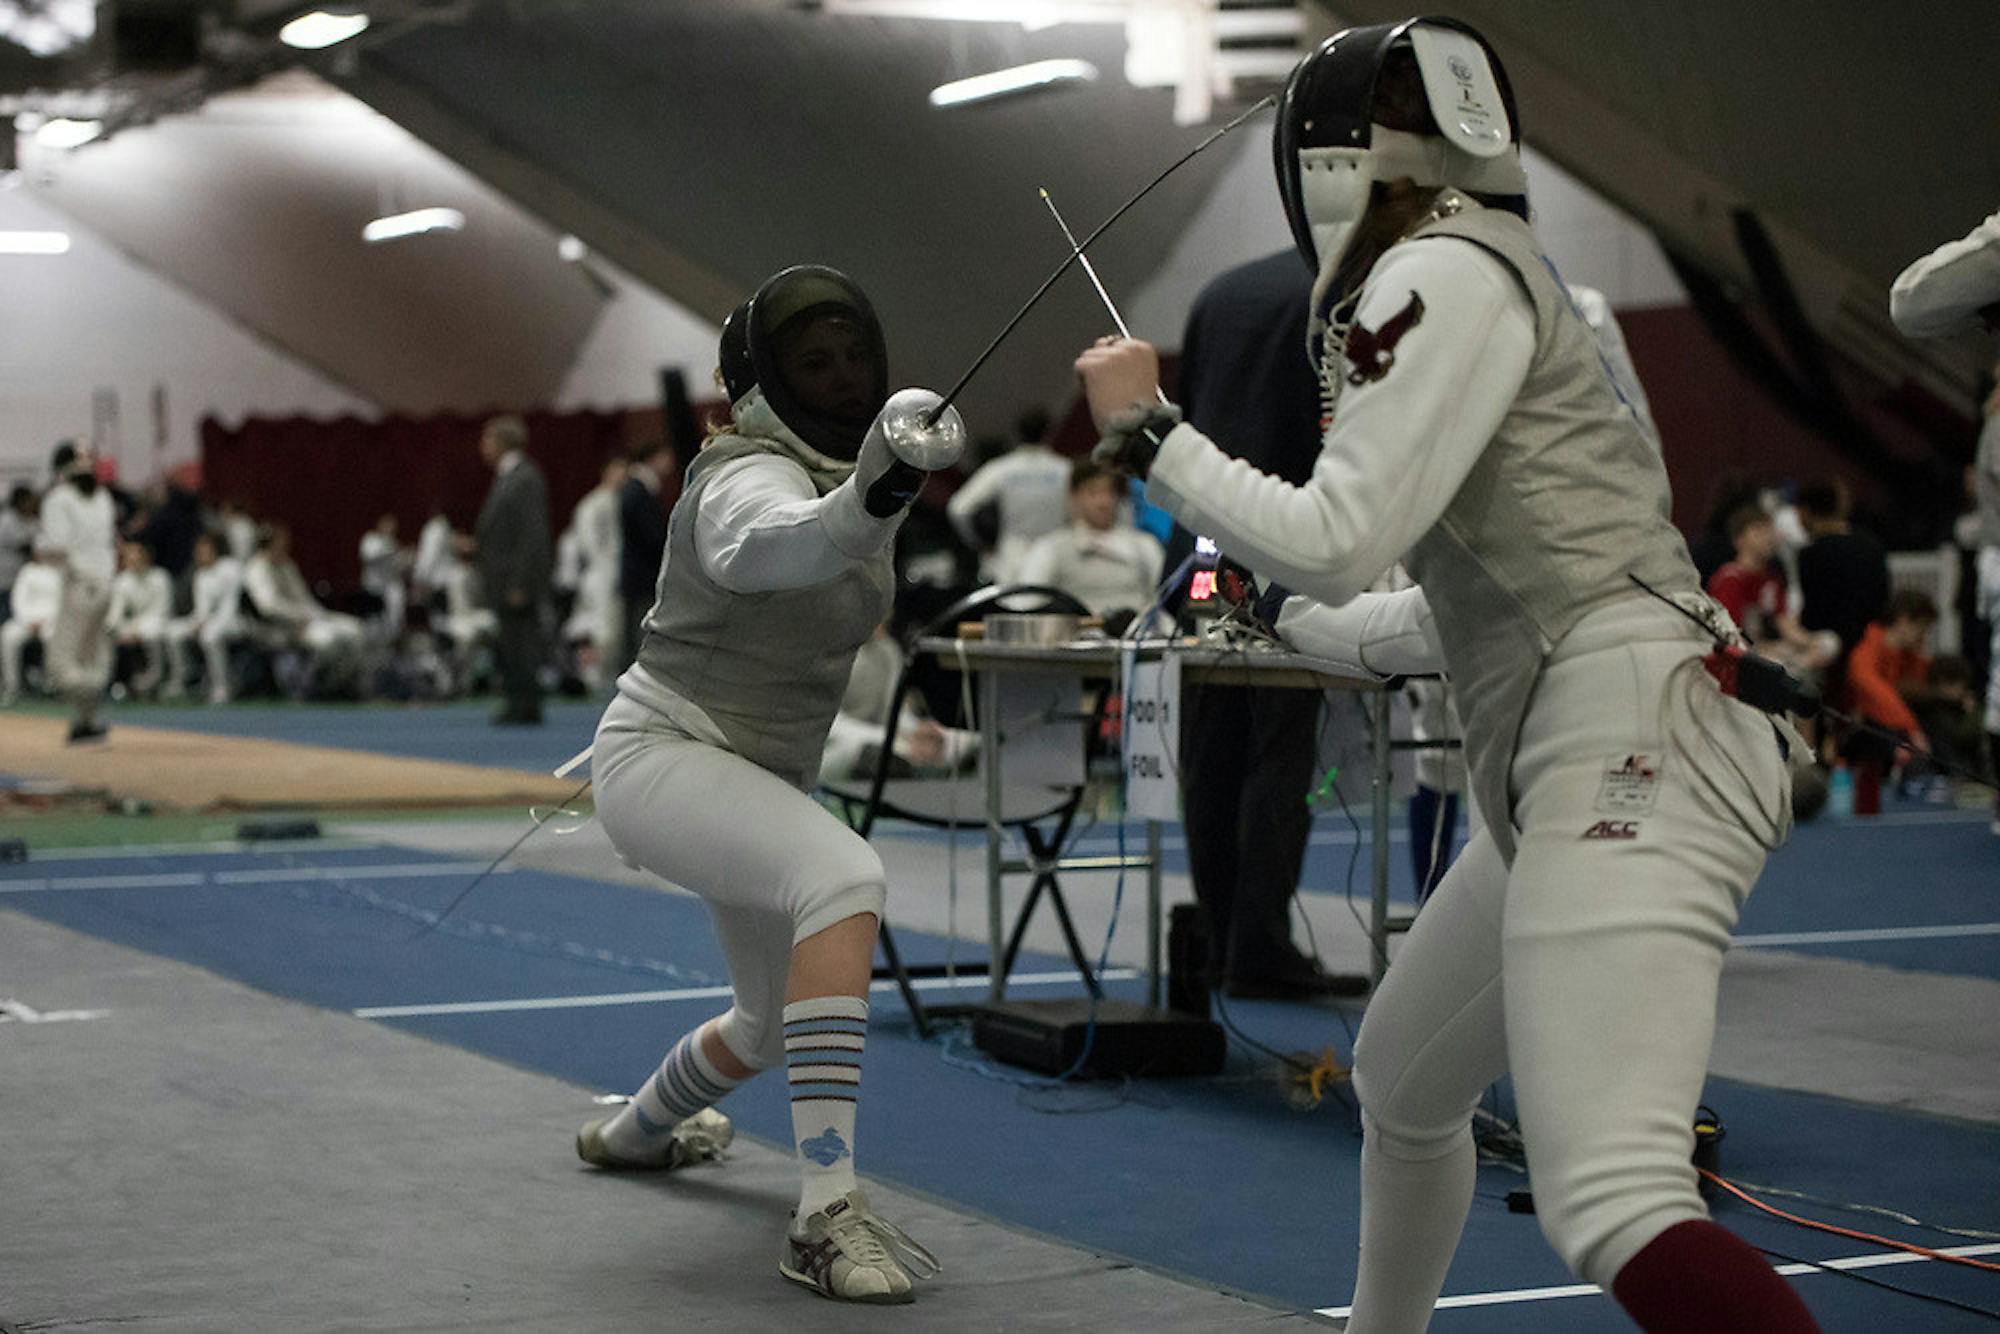 wfencing